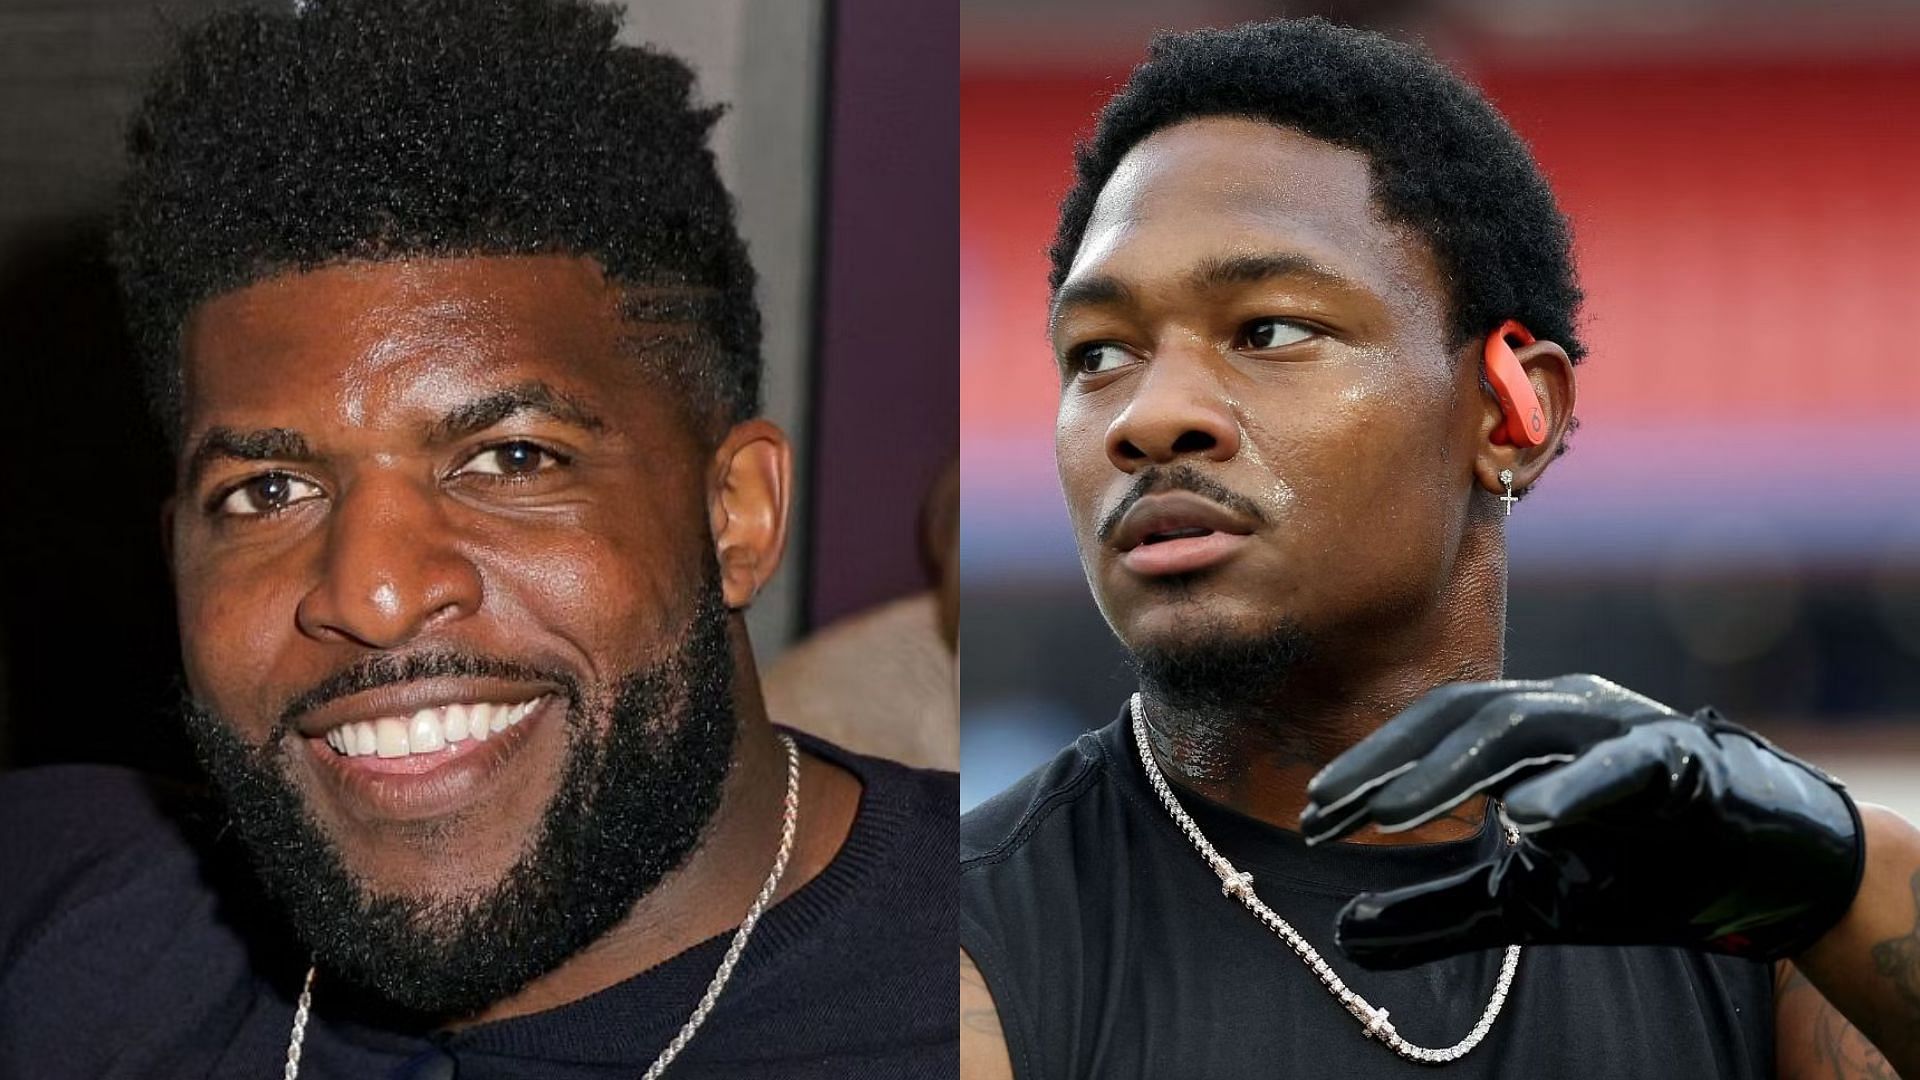 Emmanuel Acho called out Stefon Diggs